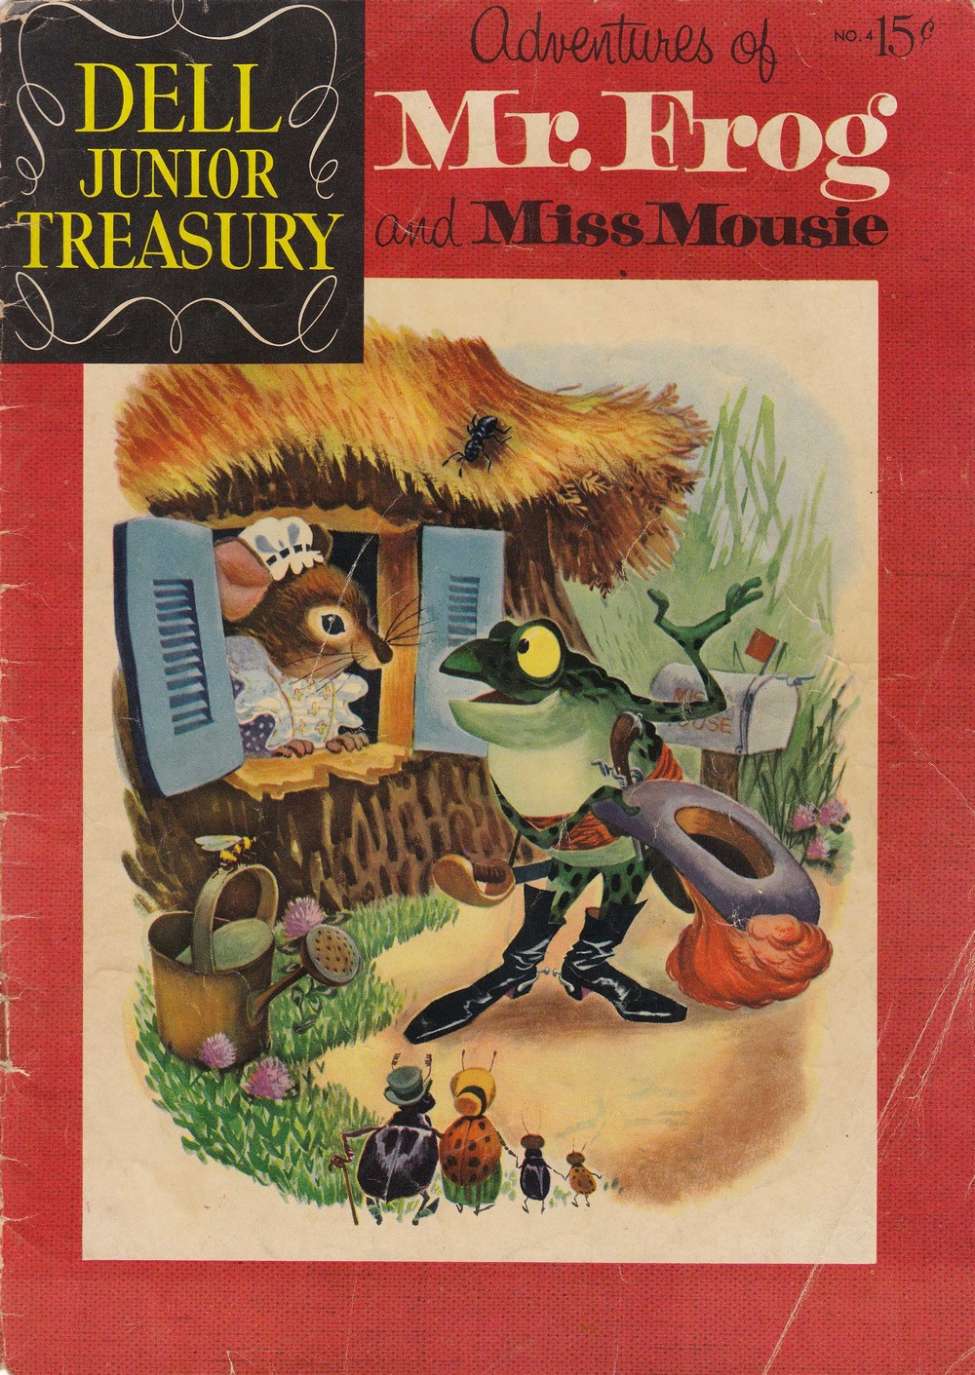 Book Cover For Dell Junior Treasury 4 - Adventures of Mr. Frog and Miss Mousie